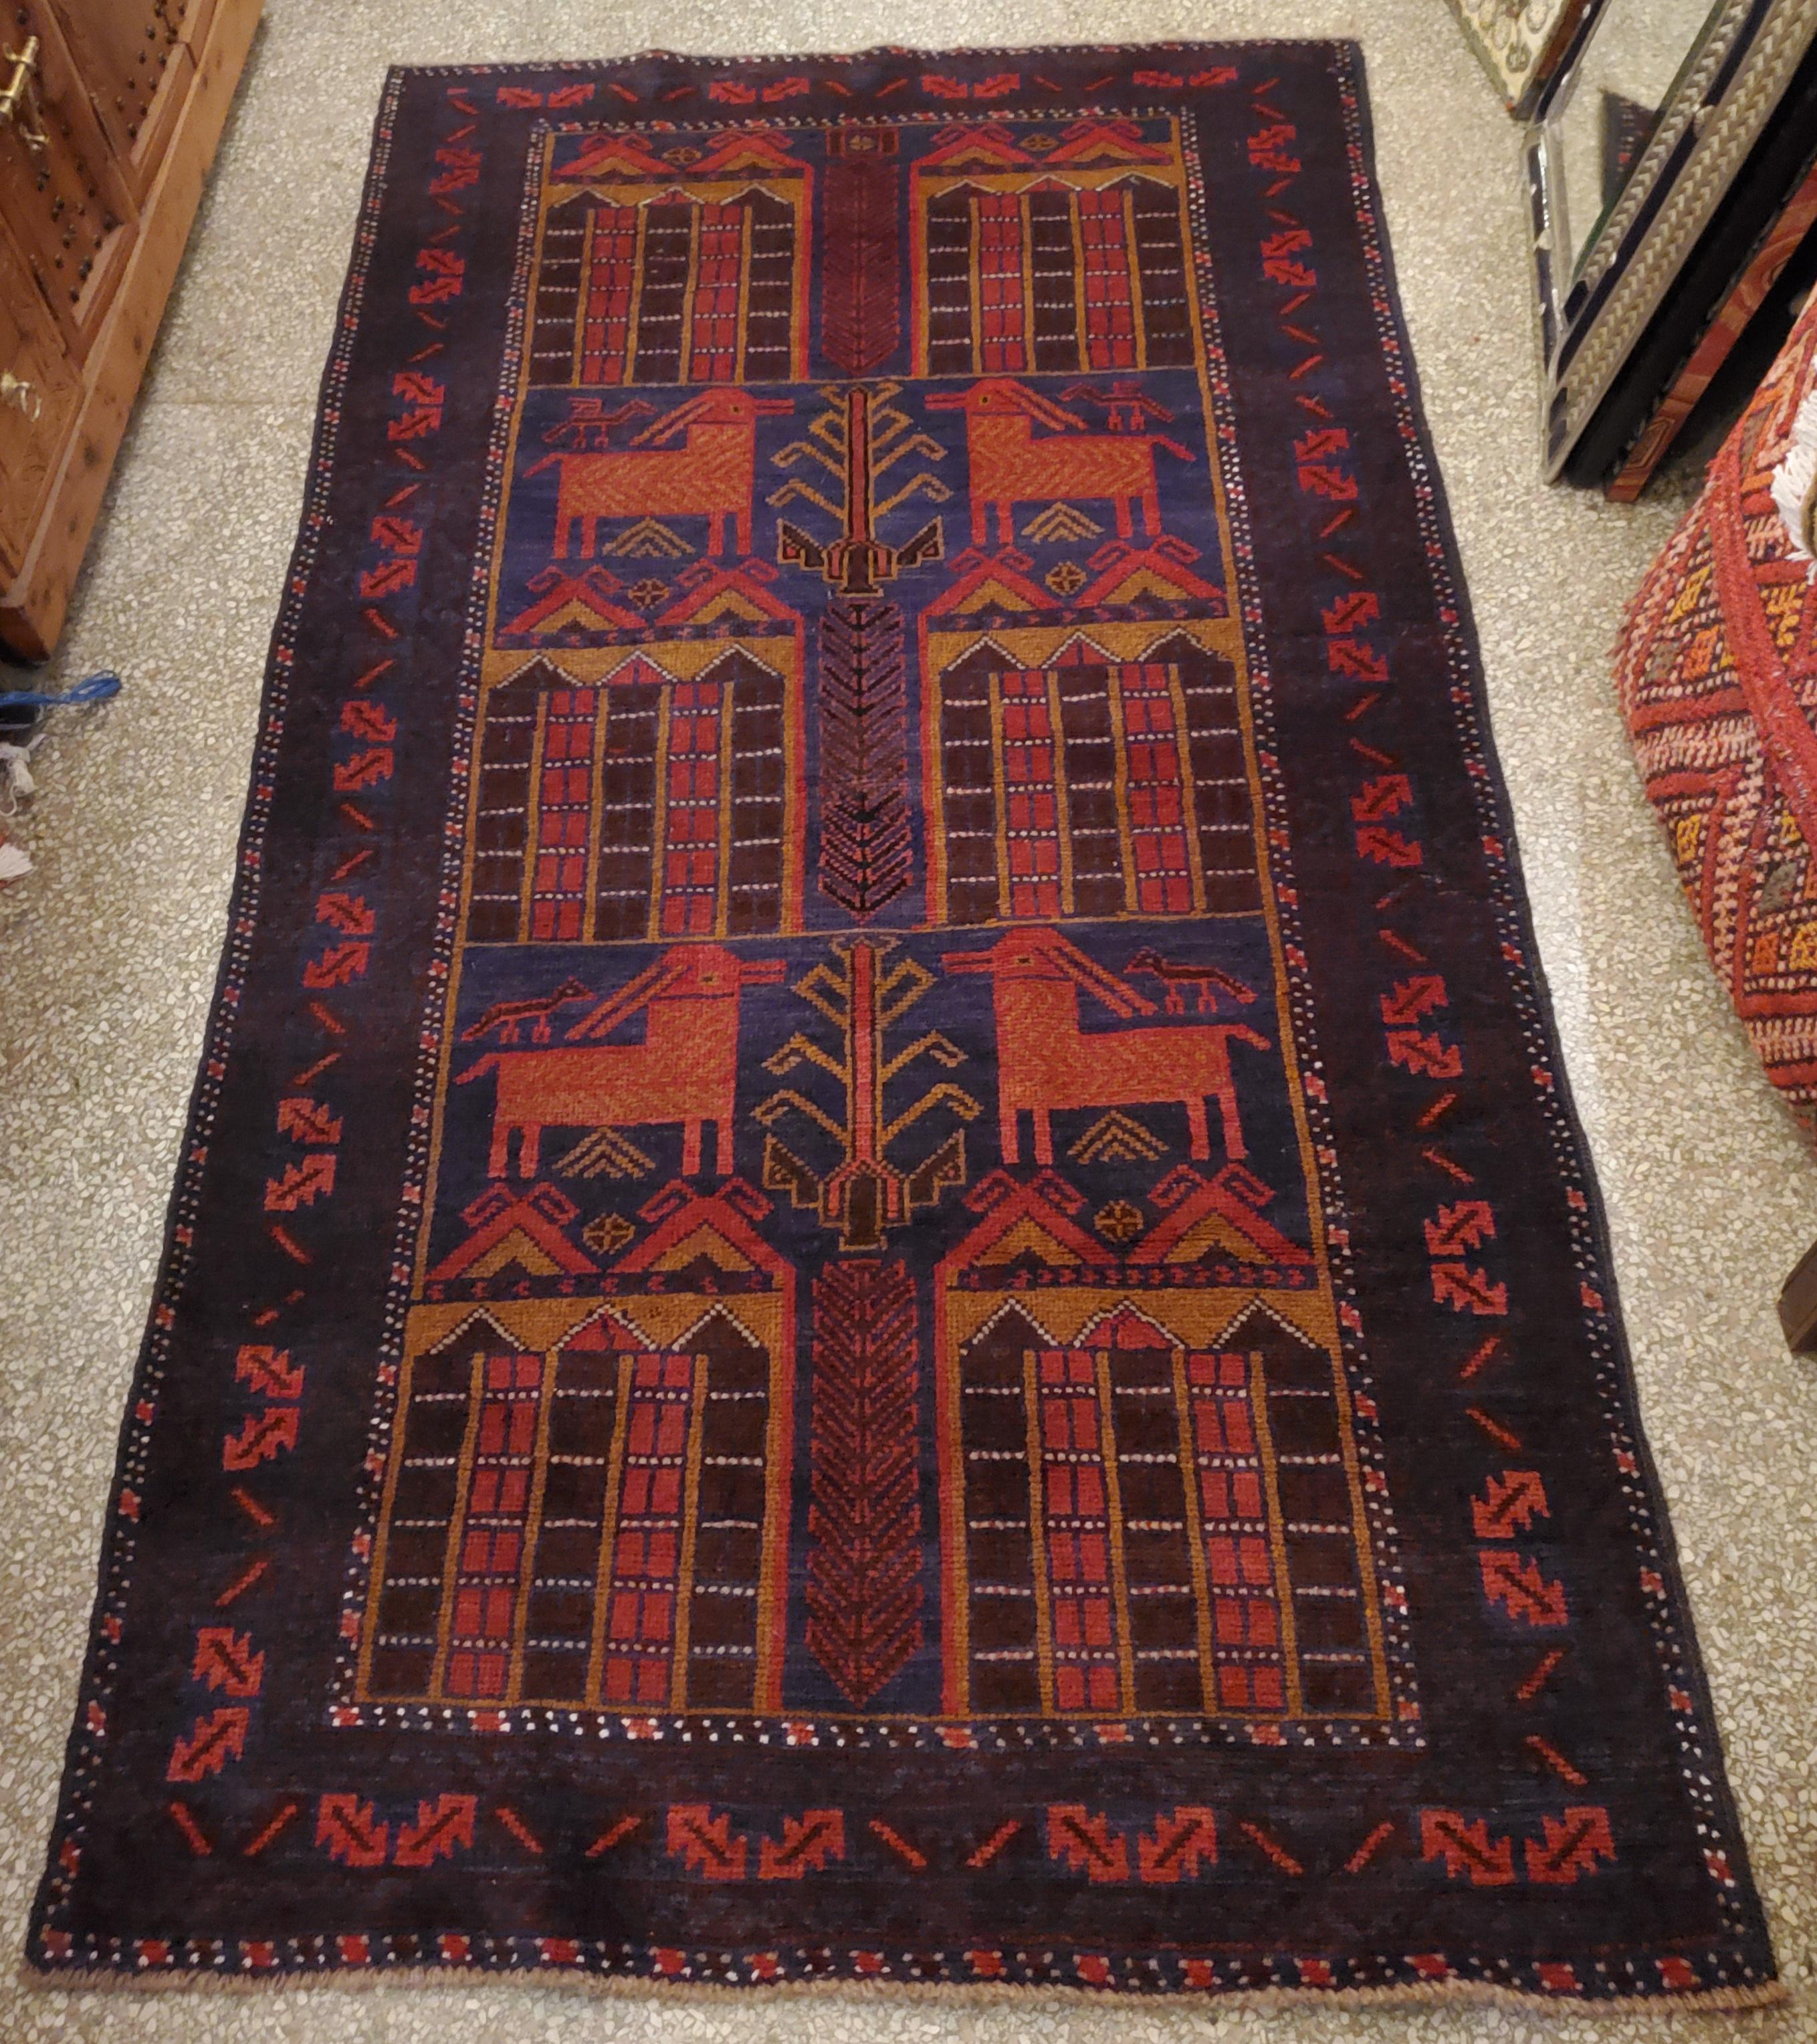 Medium to Large Size Afghan Area Carpet / Rug, Colorful / 11NO In New Condition For Sale In Orlando, FL